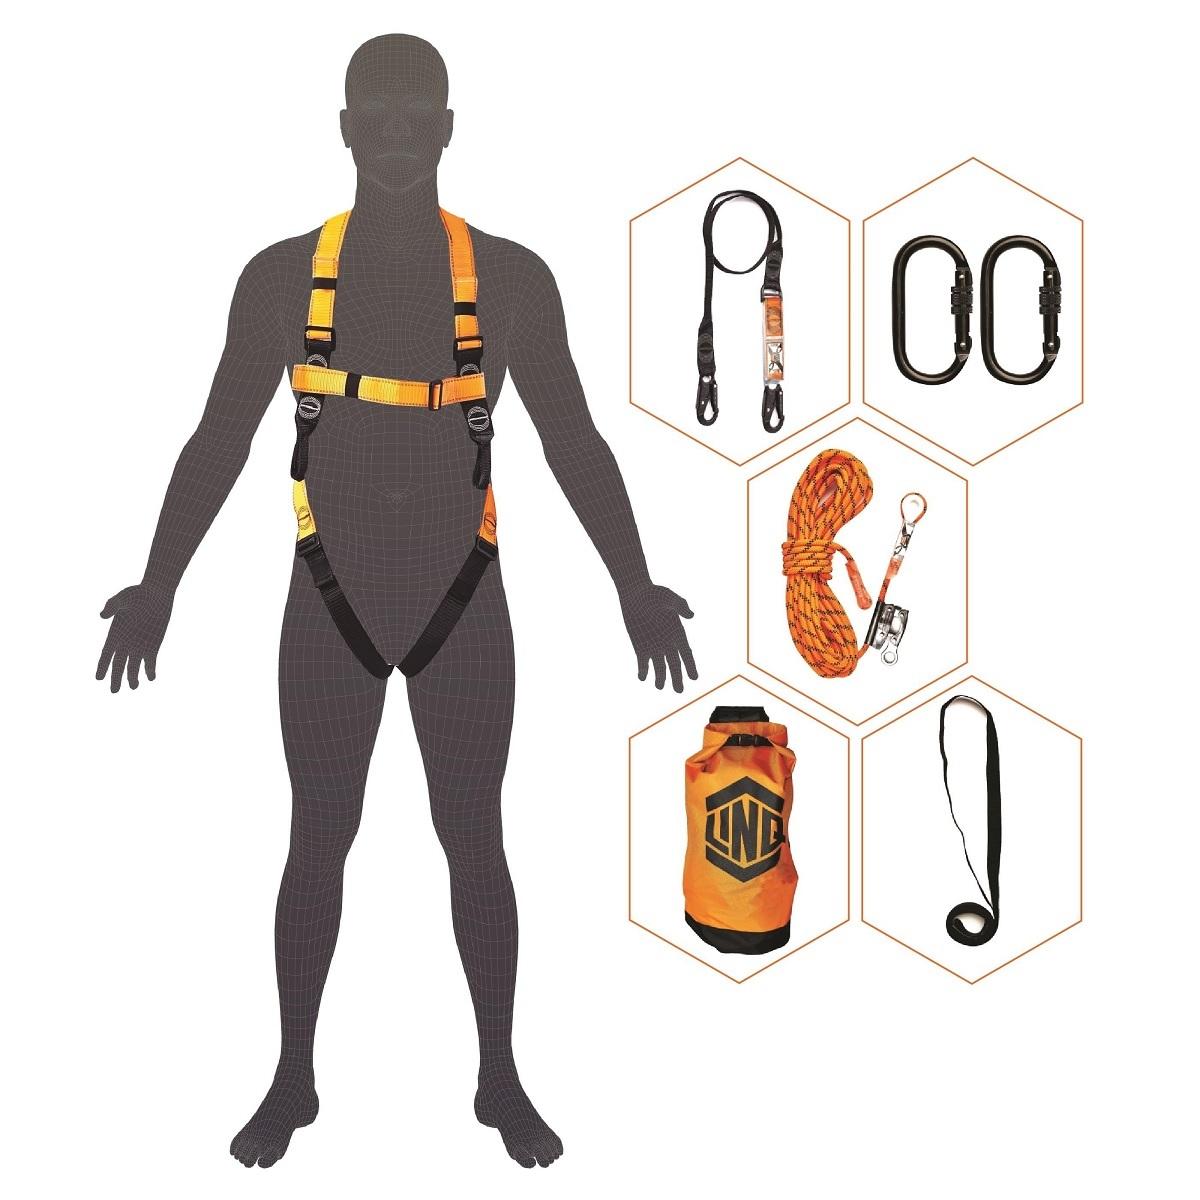 Height Safety Kits